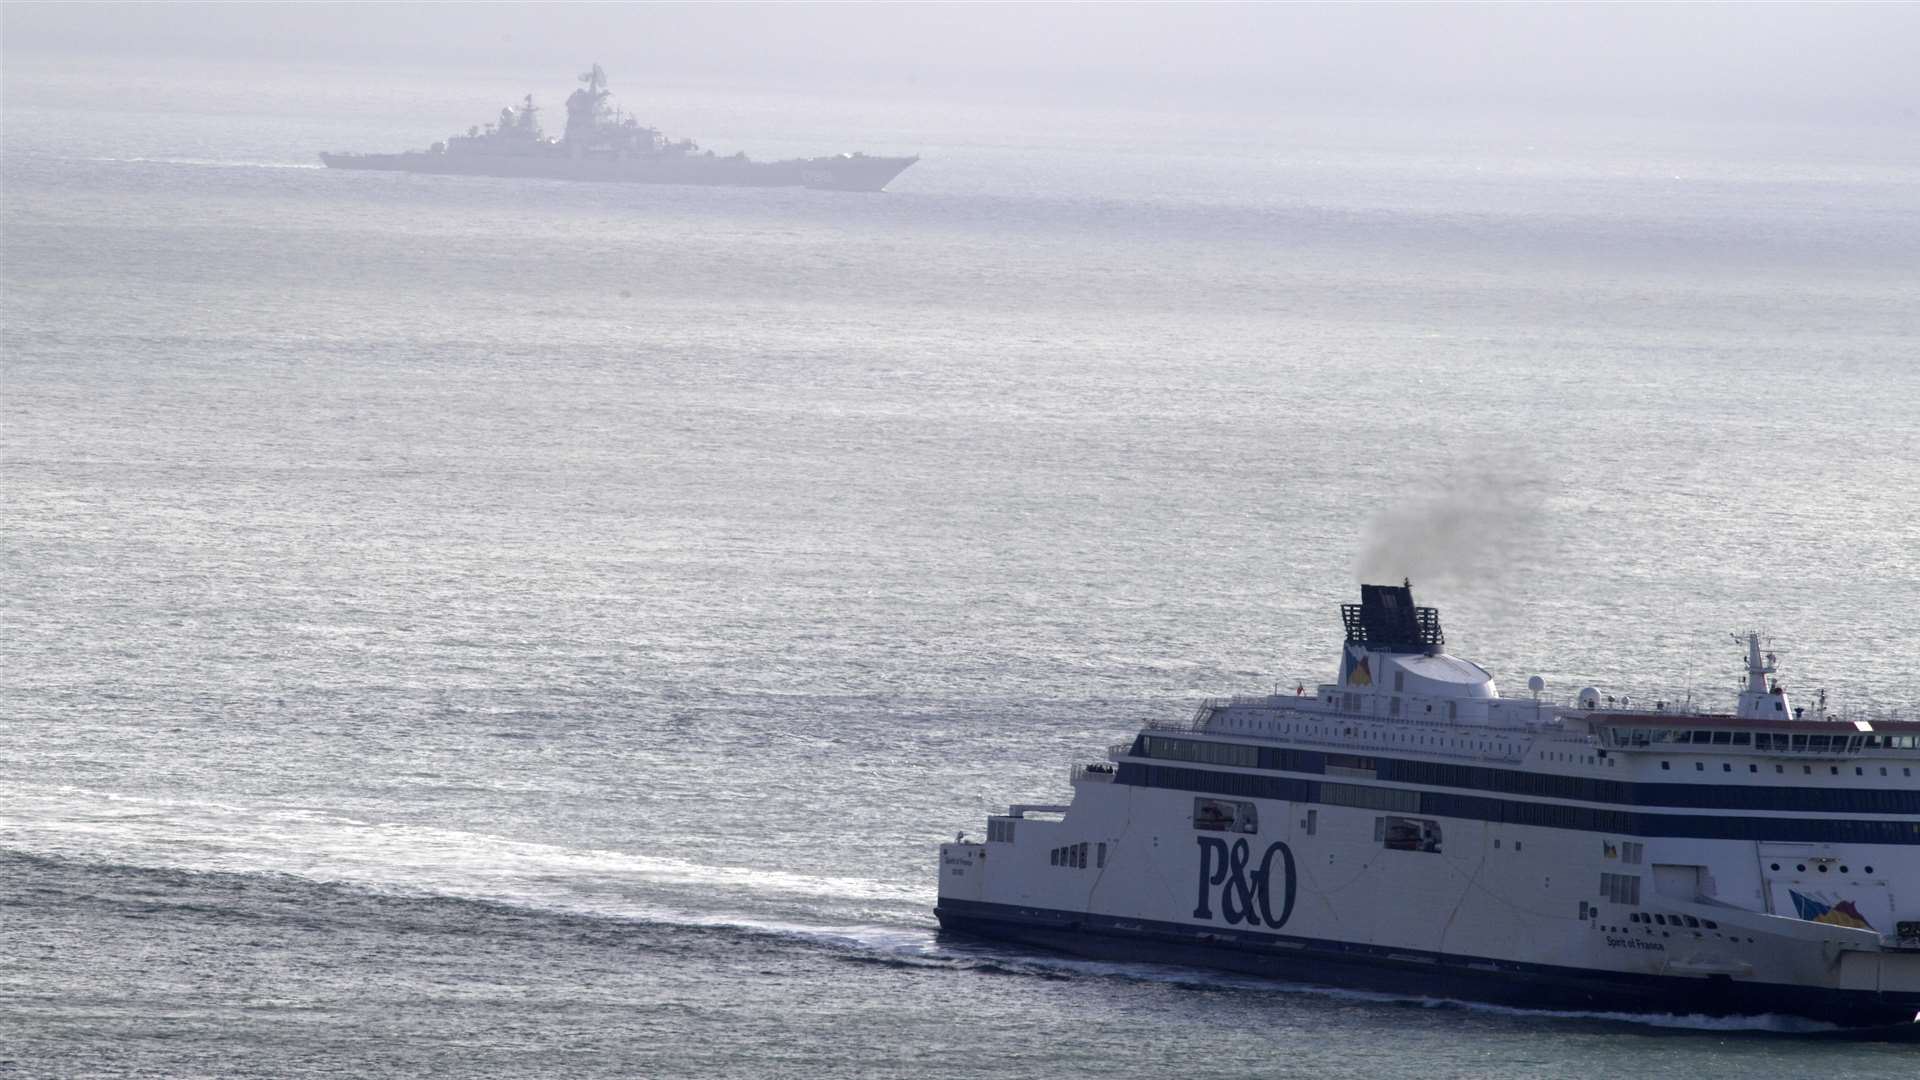 The aircraft carrier passes a P&O ferry in the Channel. Picture: Barry Goodwin.